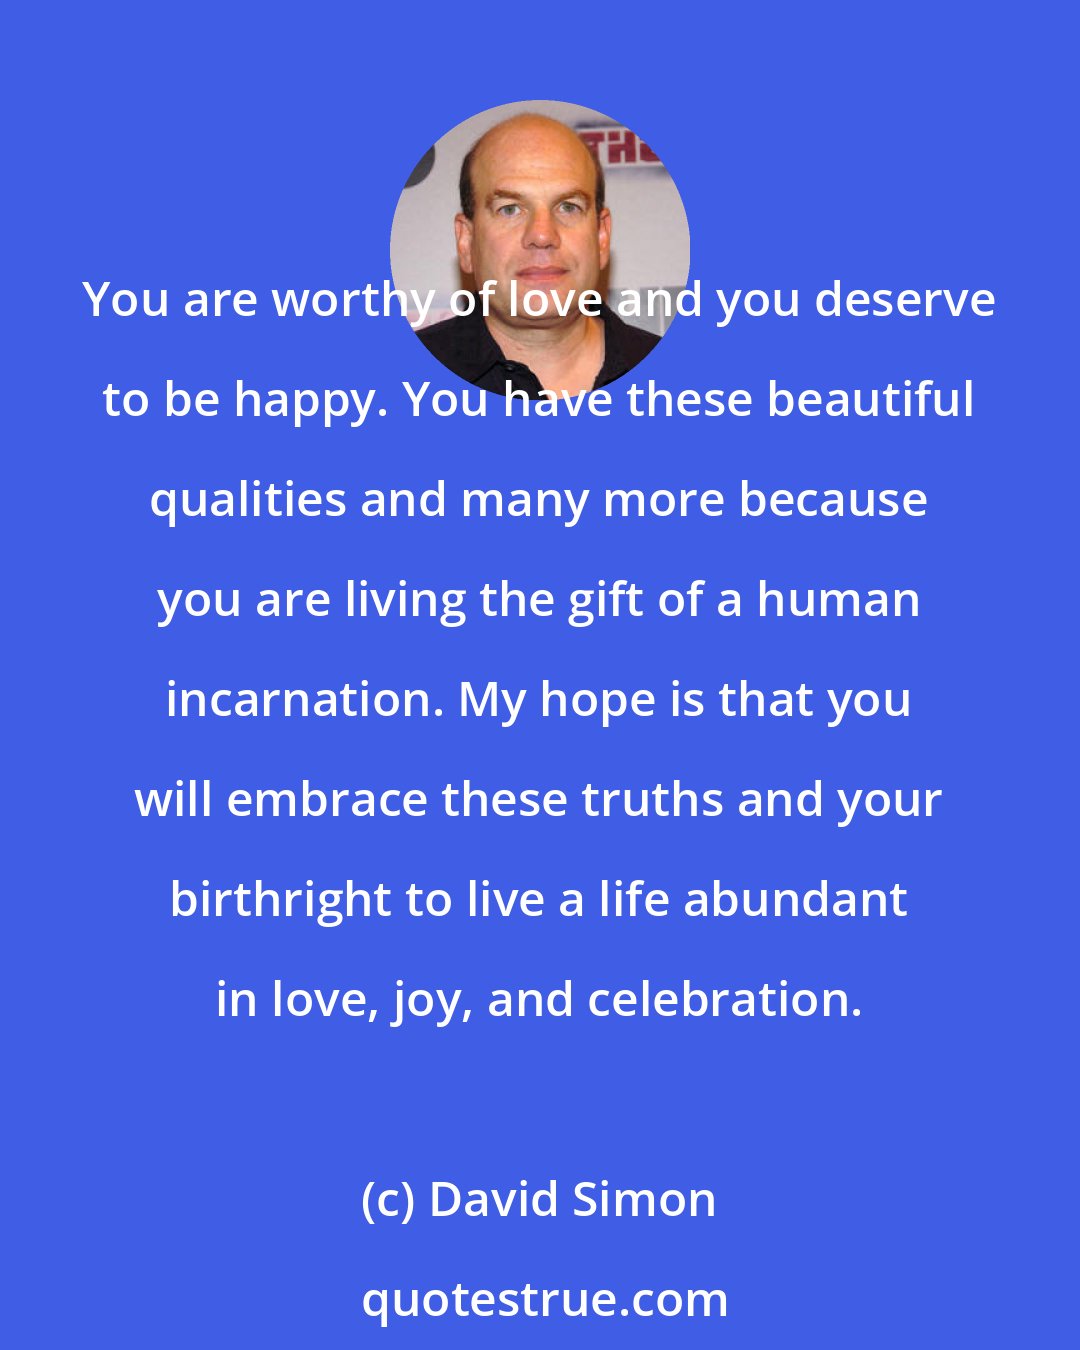 David Simon: You are worthy of love and you deserve to be happy. You have these beautiful qualities and many more because you are living the gift of a human incarnation. My hope is that you will embrace these truths and your birthright to live a life abundant in love, joy, and celebration.